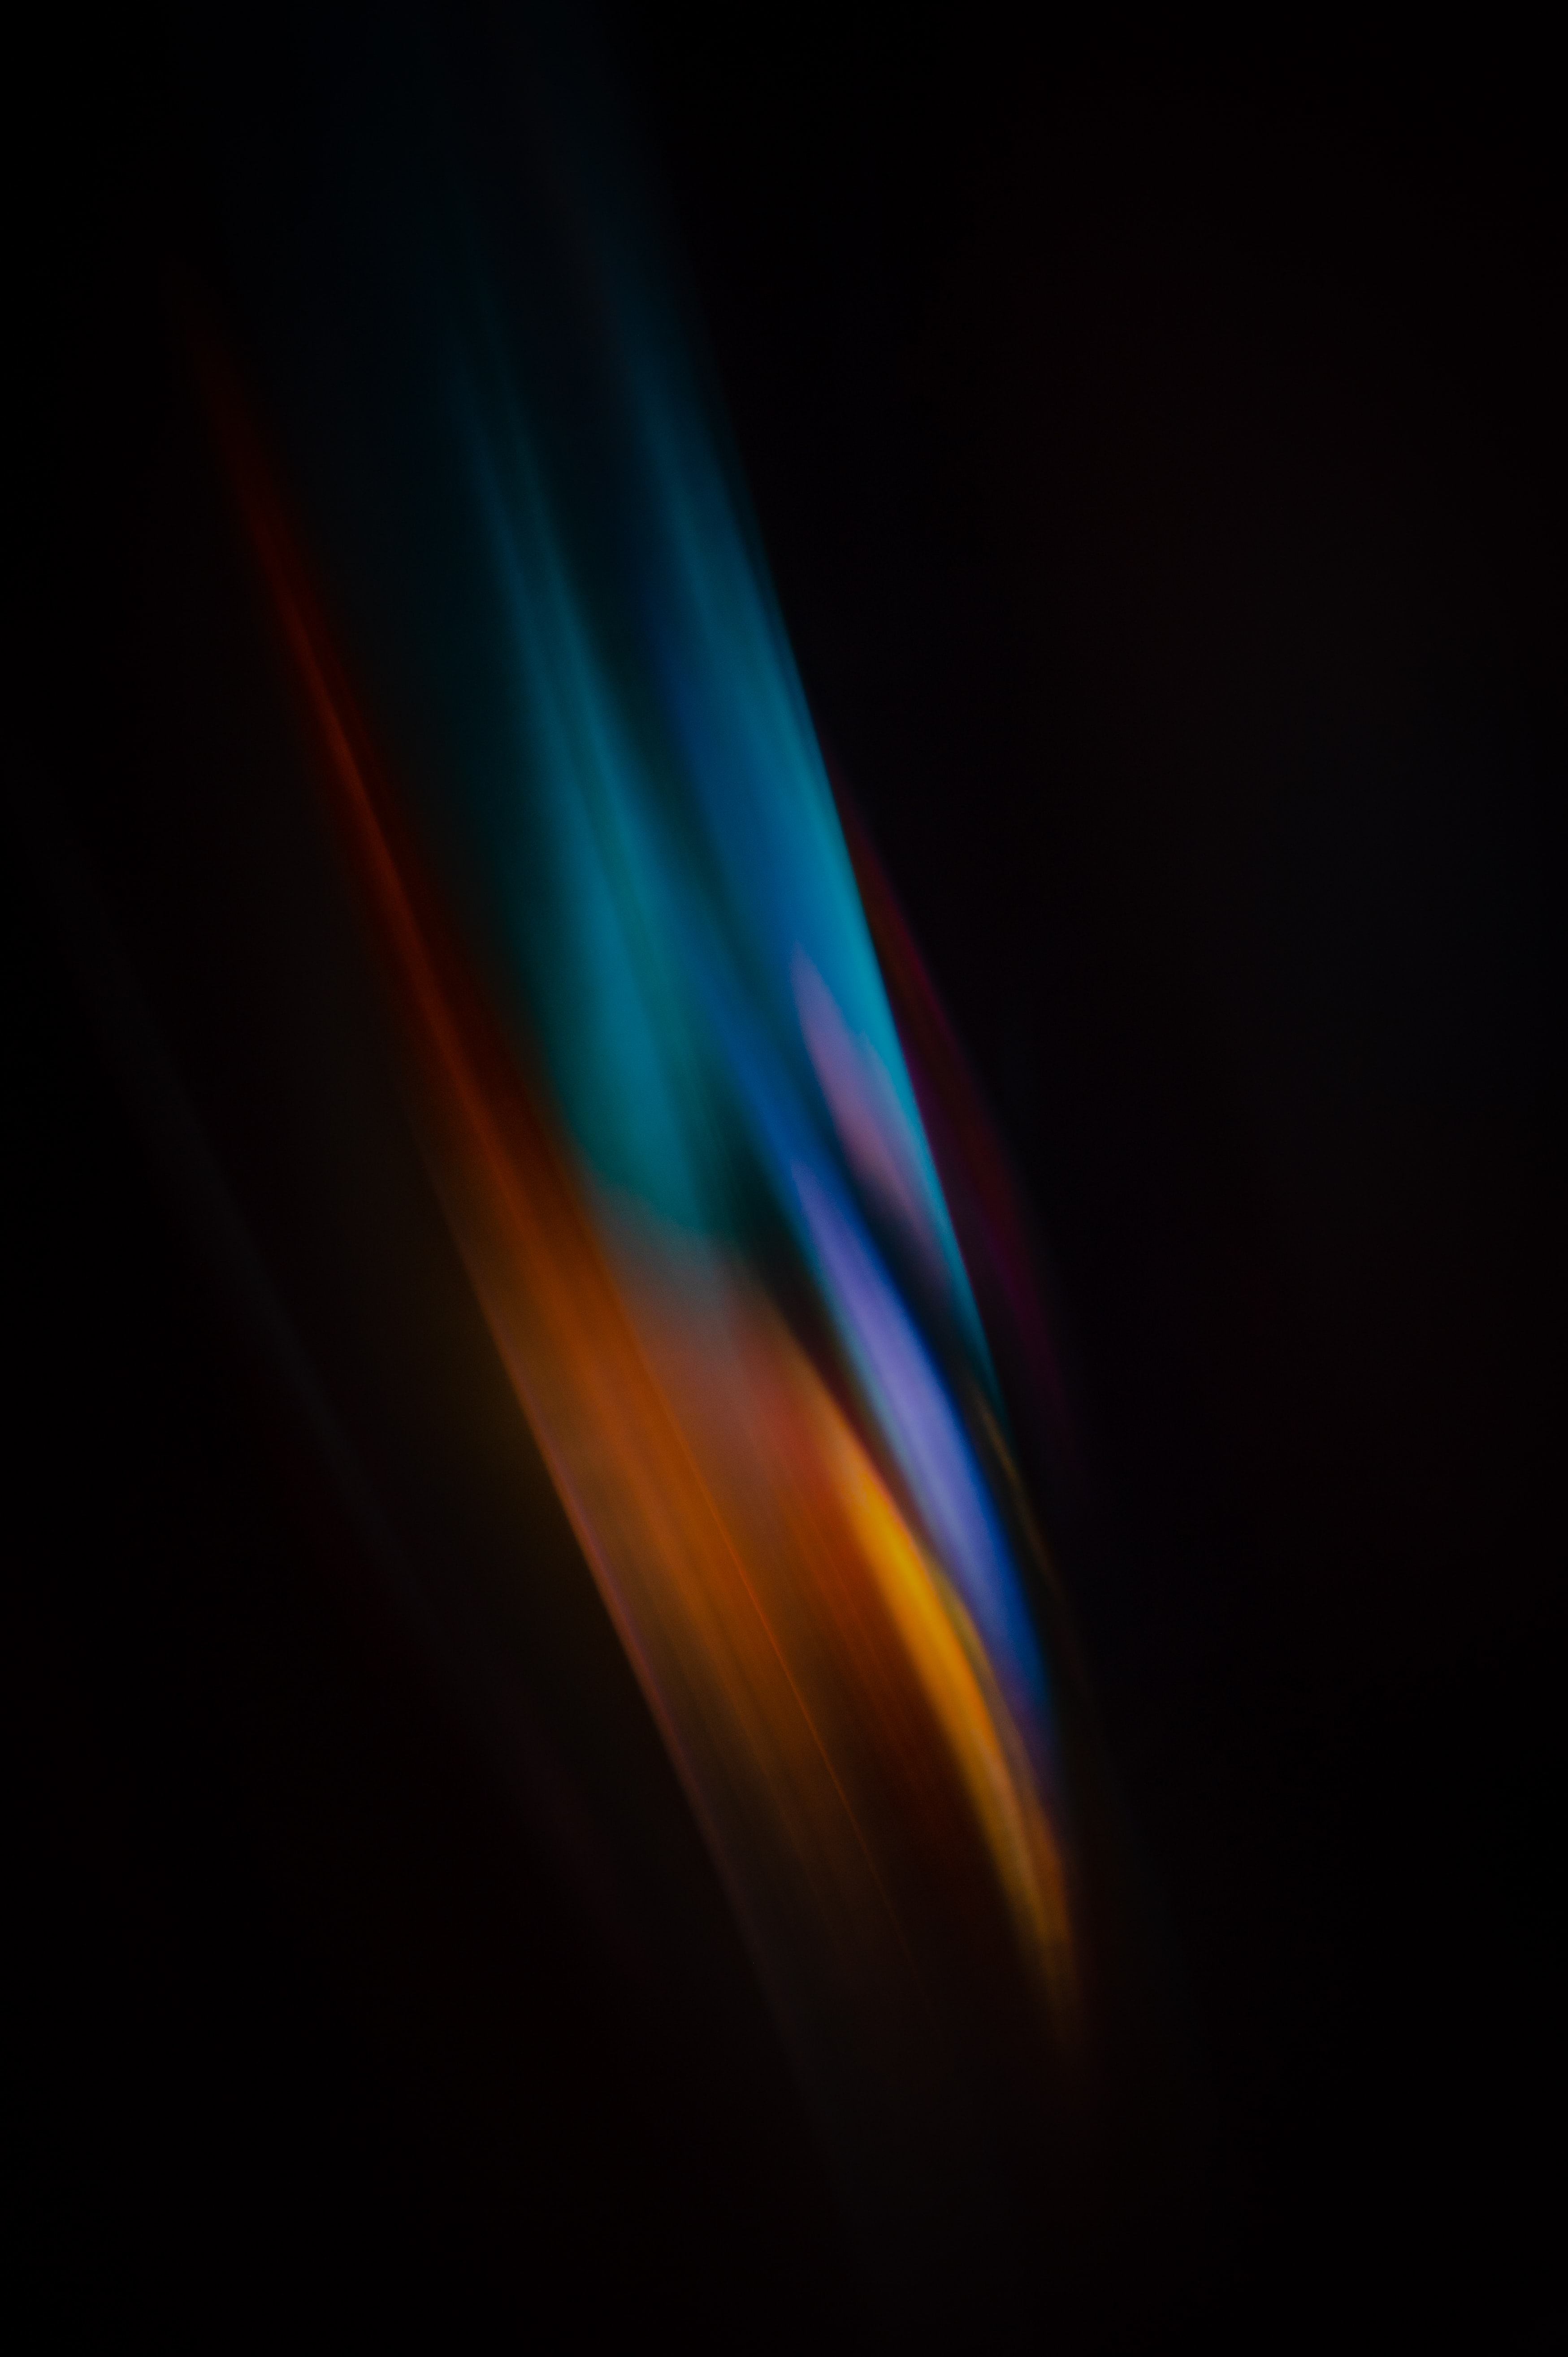 142994 download wallpaper stripes, streaks, abstract, shine, light, blur, freezelight screensavers and pictures for free